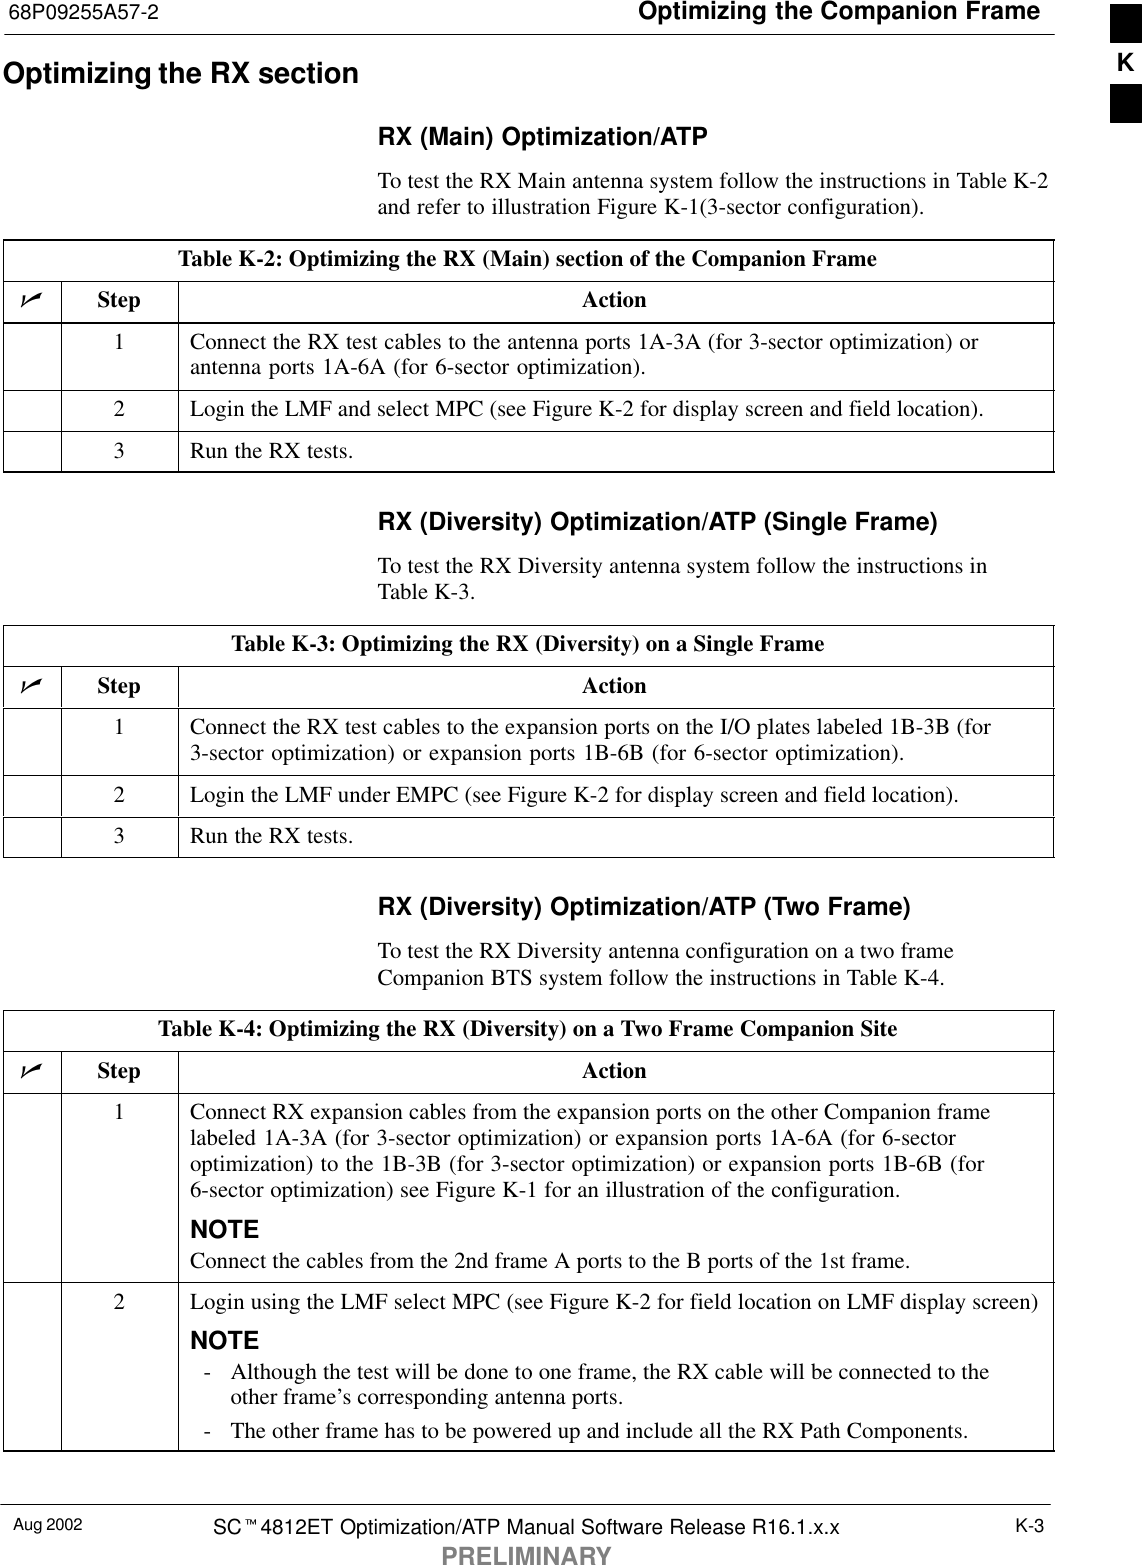 Optimizing the Companion Frame68P09255A57-2Aug 2002 SCt4812ET Optimization/ATP Manual Software Release R16.1.x.xPRELIMINARYK-3Optimizing the RX sectionRX (Main) Optimization/ATPTo test the RX Main antenna system follow the instructions in Table K-2and refer to illustration Figure K-1(3-sector configuration).Table K-2: Optimizing the RX (Main) section of the Companion FramenStep Action1Connect the RX test cables to the antenna ports 1A-3A (for 3-sector optimization) orantenna ports 1A-6A (for 6-sector optimization).2Login the LMF and select MPC (see Figure K-2 for display screen and field location).3Run the RX tests.RX (Diversity) Optimization/ATP (Single Frame)To test the RX Diversity antenna system follow the instructions inTable K-3.Table K-3: Optimizing the RX (Diversity) on a Single FramenStep Action1Connect the RX test cables to the expansion ports on the I/O plates labeled 1B-3B (for3-sector optimization) or expansion ports 1B-6B (for 6-sector optimization).2Login the LMF under EMPC (see Figure K-2 for display screen and field location).3Run the RX tests.RX (Diversity) Optimization/ATP (Two Frame)To test the RX Diversity antenna configuration on a two frameCompanion BTS system follow the instructions in Table K-4.Table K-4: Optimizing the RX (Diversity) on a Two Frame Companion SitenStep Action1Connect RX expansion cables from the expansion ports on the other Companion framelabeled 1A-3A (for 3-sector optimization) or expansion ports 1A-6A (for 6-sectoroptimization) to the 1B-3B (for 3-sector optimization) or expansion ports 1B-6B (for6-sector optimization) see Figure K-1 for an illustration of the configuration.NOTEConnect the cables from the 2nd frame A ports to the B ports of the 1st frame.2Login using the LMF select MPC (see Figure K-2 for field location on LMF display screen)NOTE- Although the test will be done to one frame, the RX cable will be connected to theother frame’s corresponding antenna ports.- The other frame has to be powered up and include all the RX Path Components.K